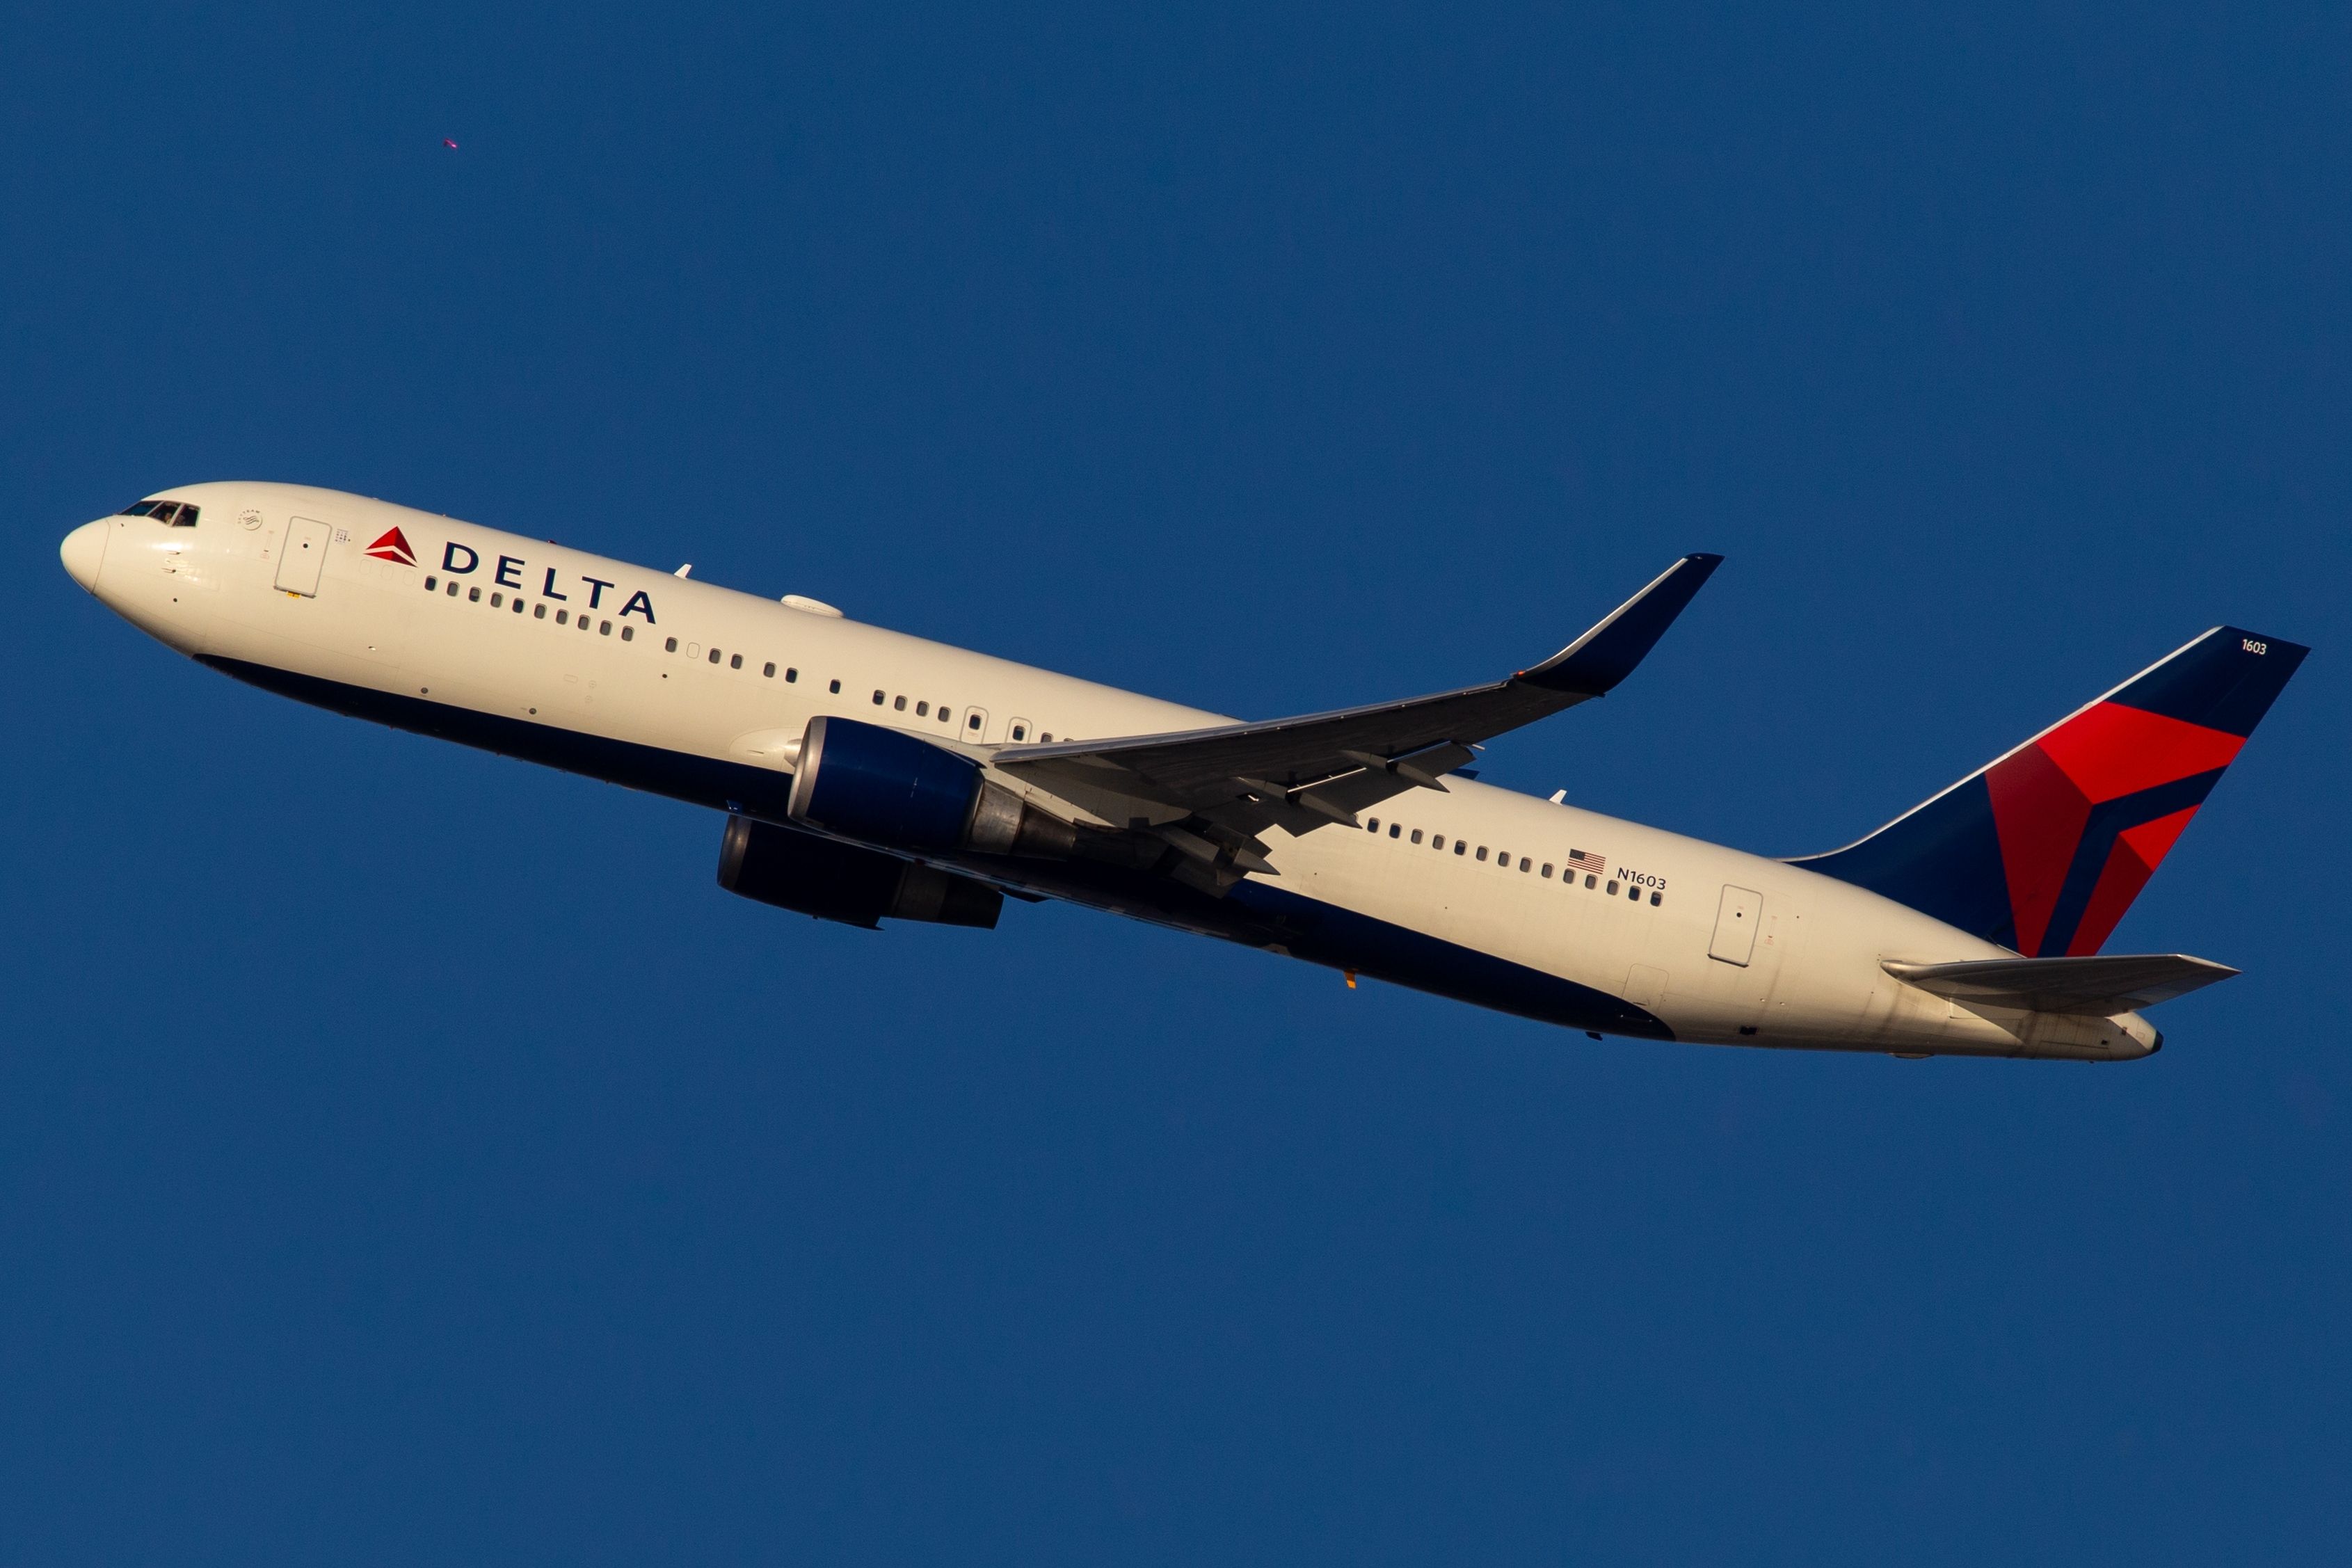 A Delta Air Lines Boeing 767-300 taking off